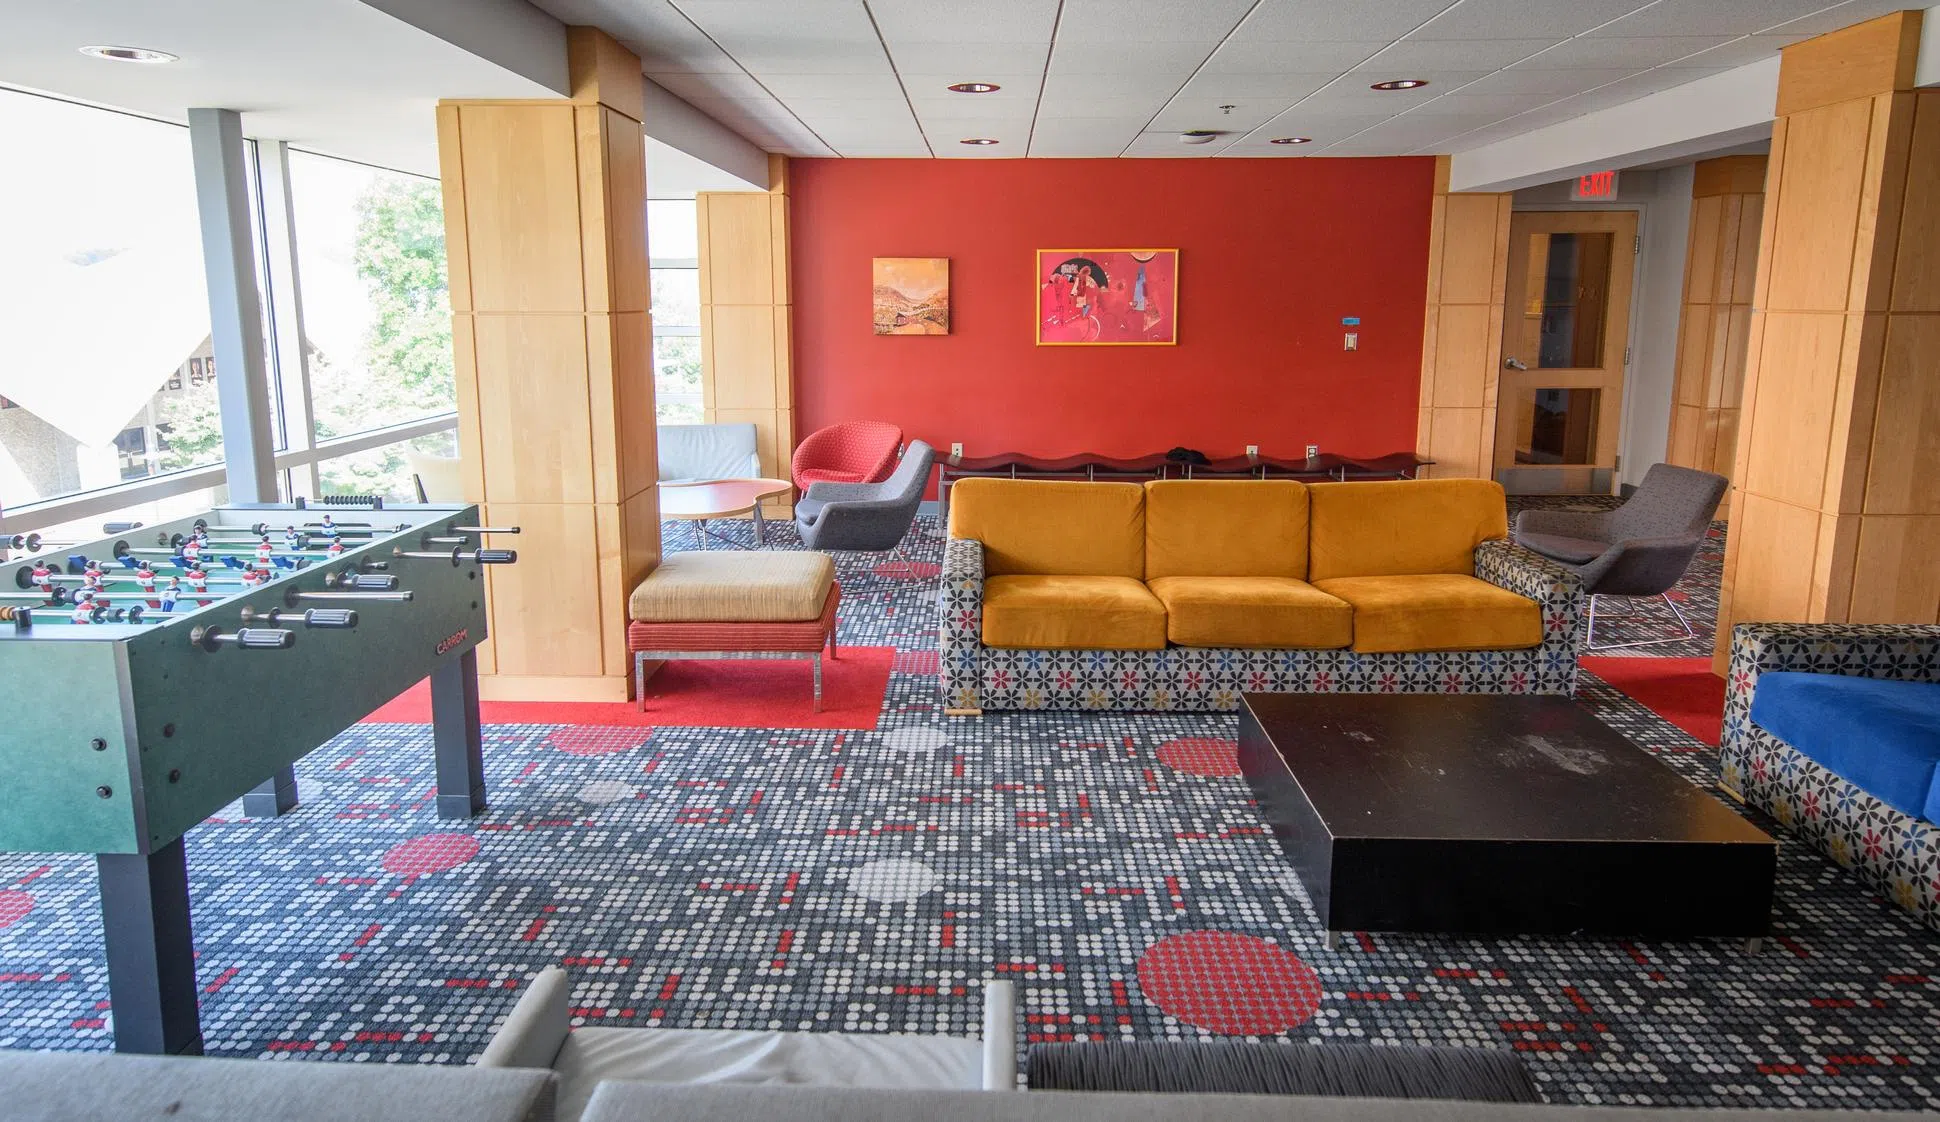 Each floor of Wright Hall has communal spaces where residents can host game nights, watch movies, and study together.